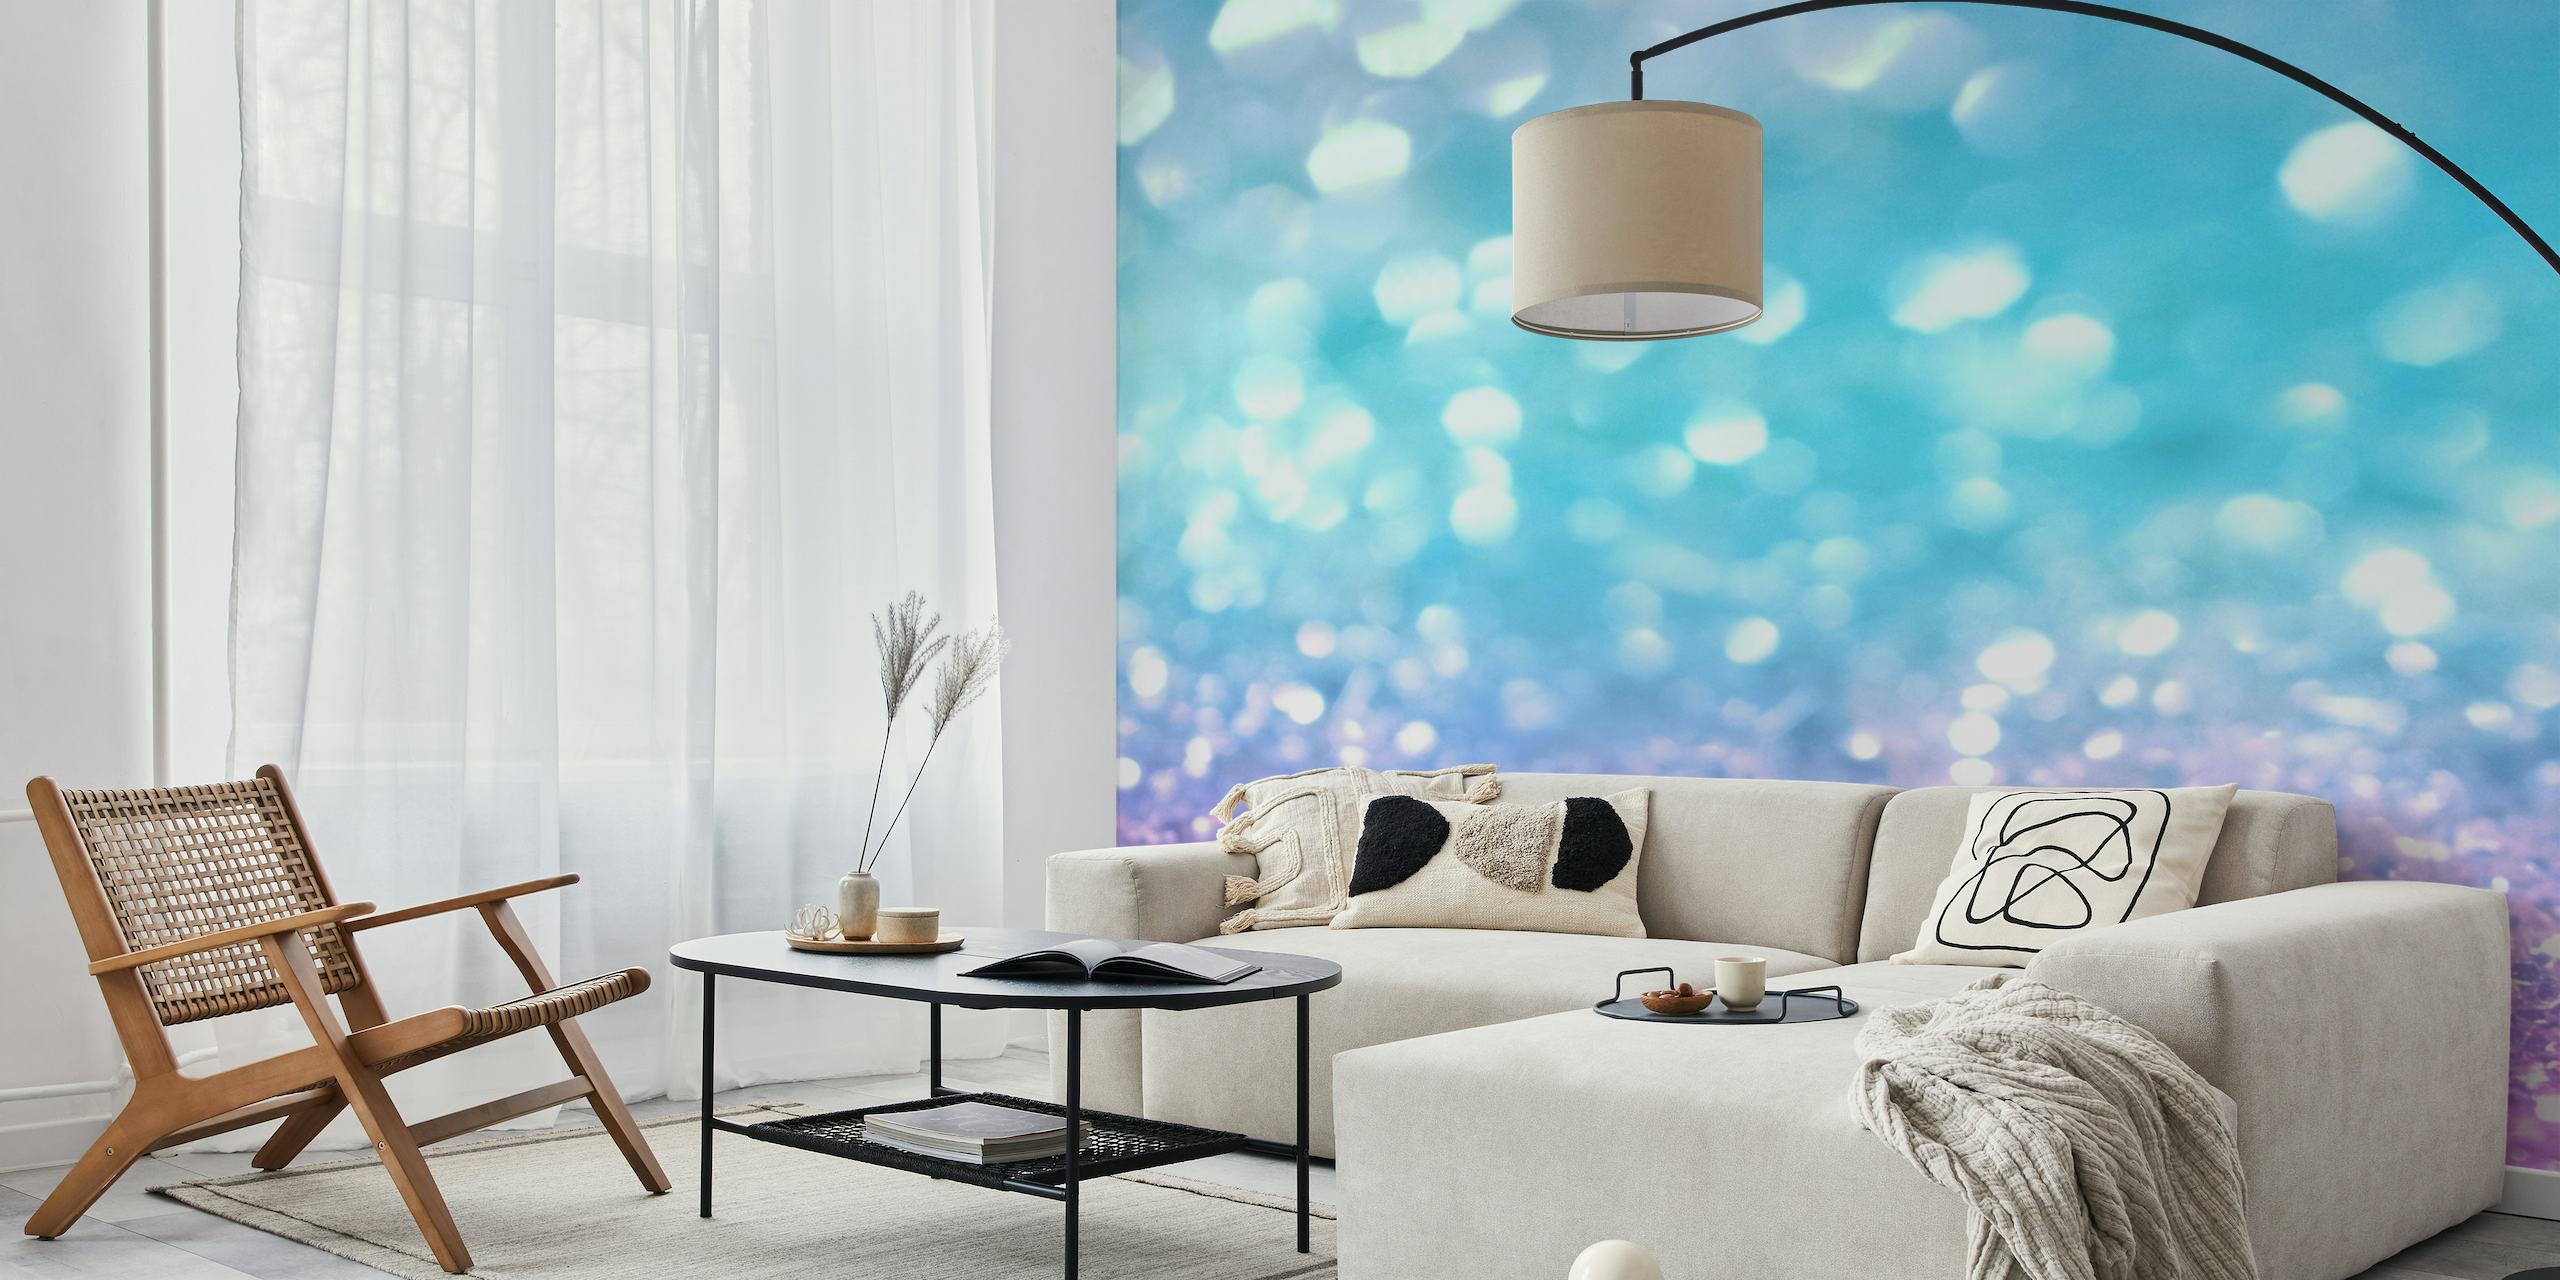 Whimsical blue and purple glitter effect mural reminiscent of a mermaid's undersea world.